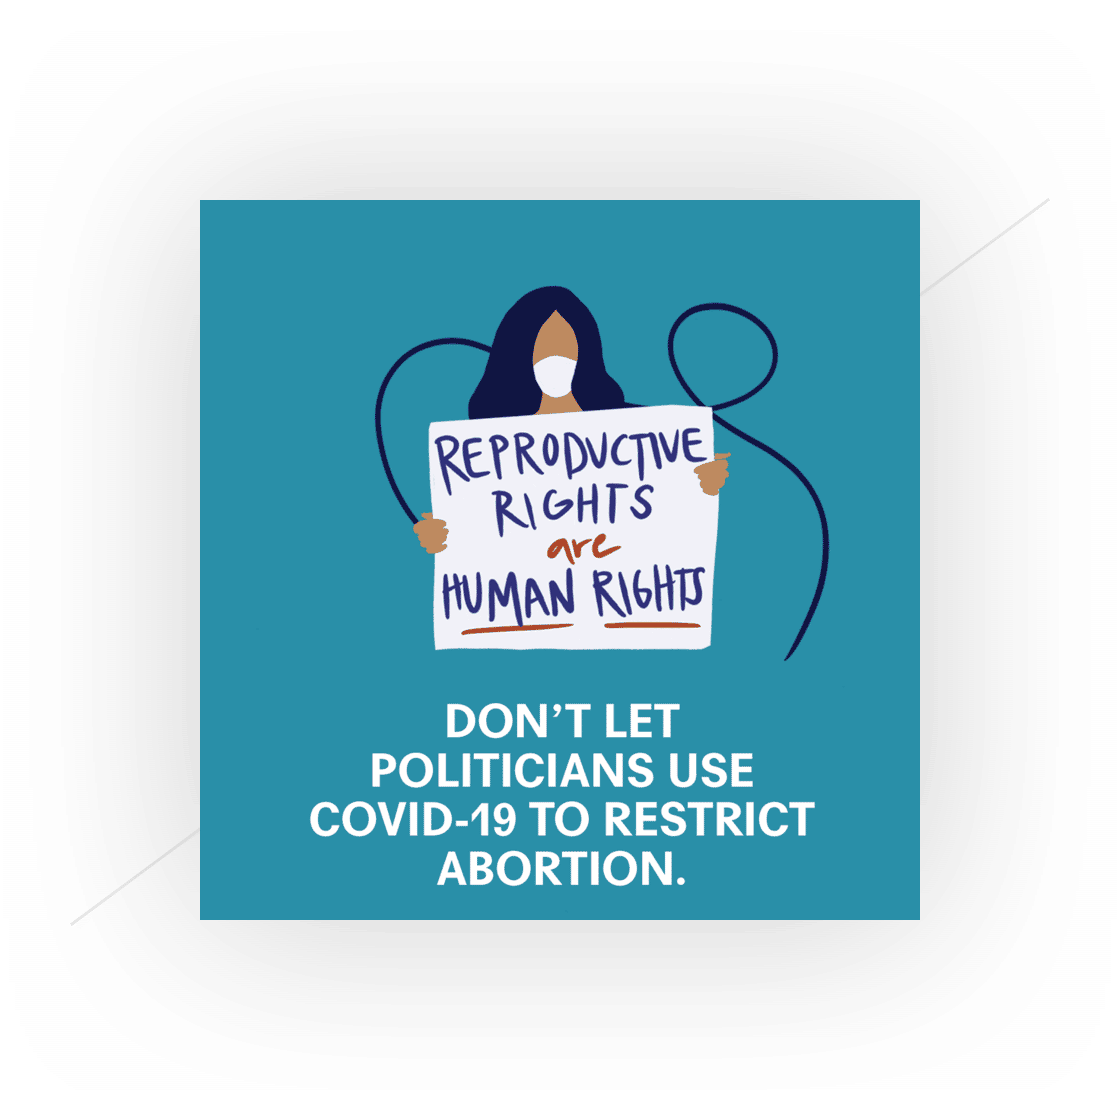 graphic of woman holding sign that reads "Reproductive rights are human rights" and copy that reads "Don't let politicians use COVID-19 to restrict abortion."